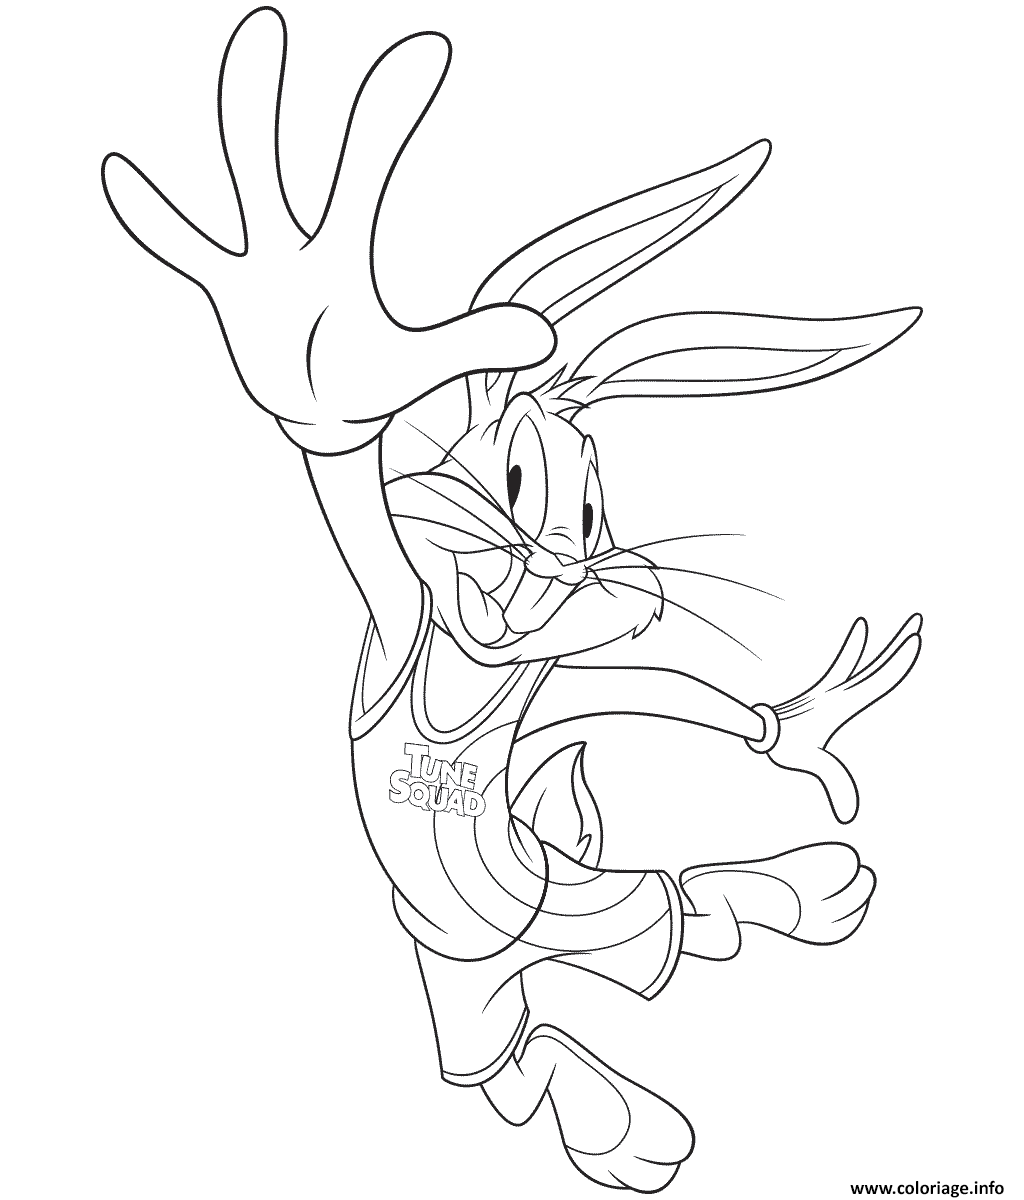 Coloriage Bugs Bunny From Space Jam A New Legacy Dessin à Imprimer